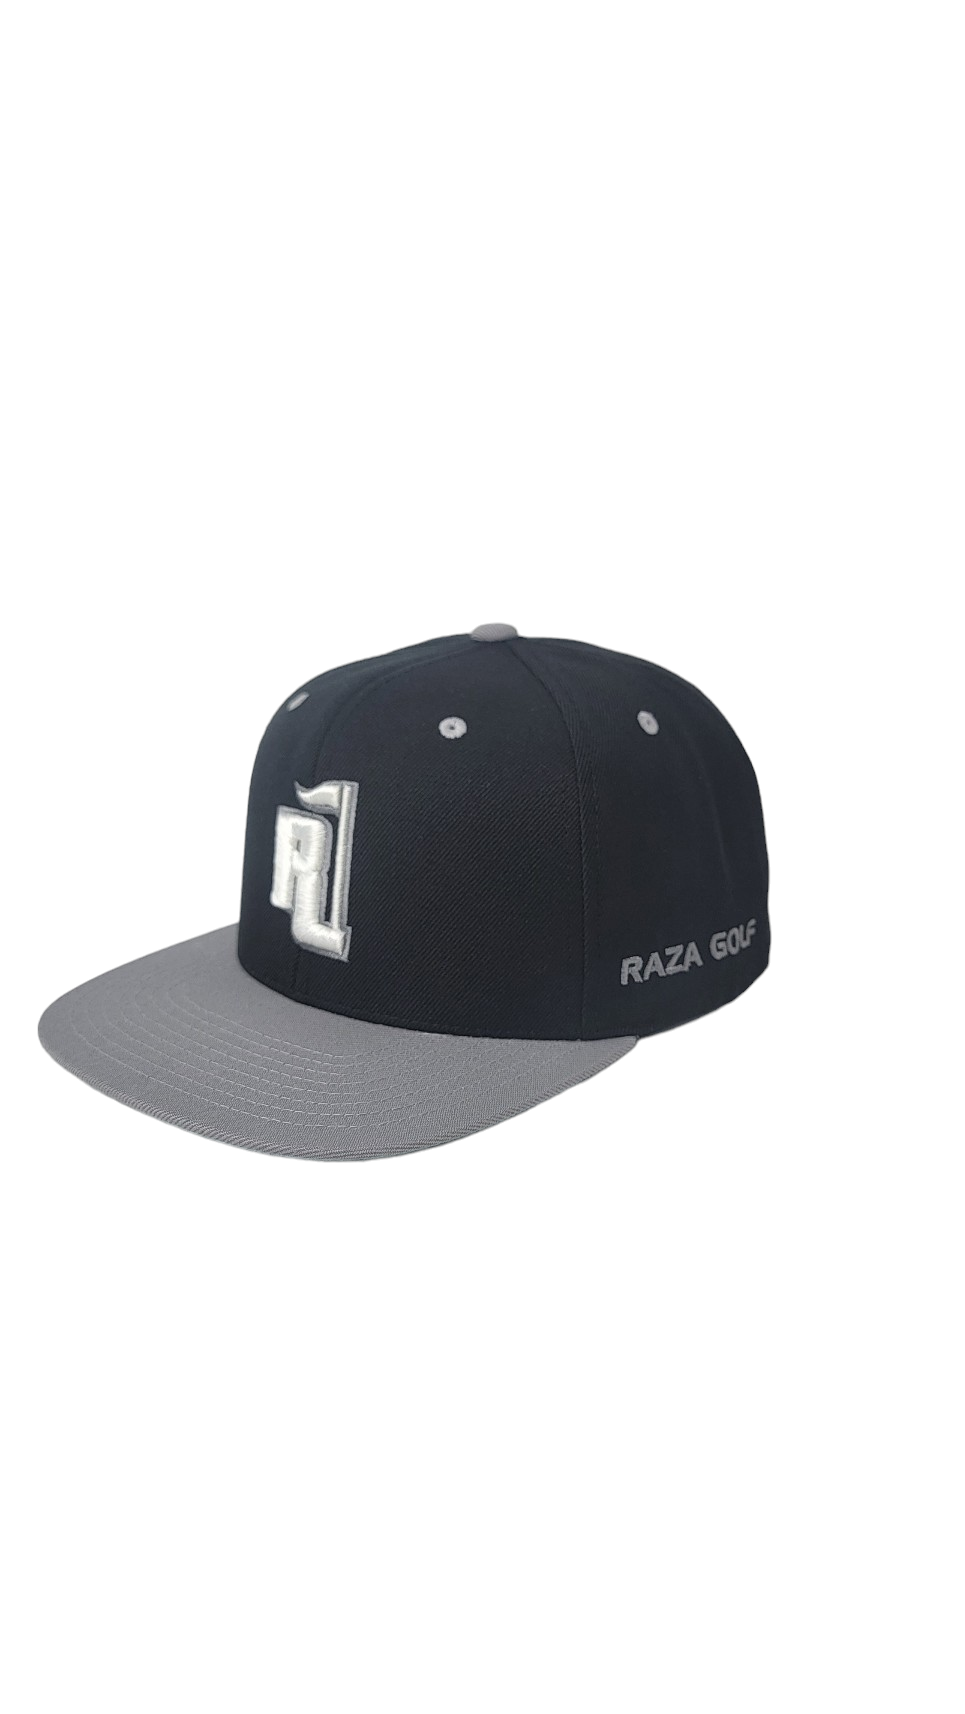 Raza Golf Black and Silver snapback with white and silver logo